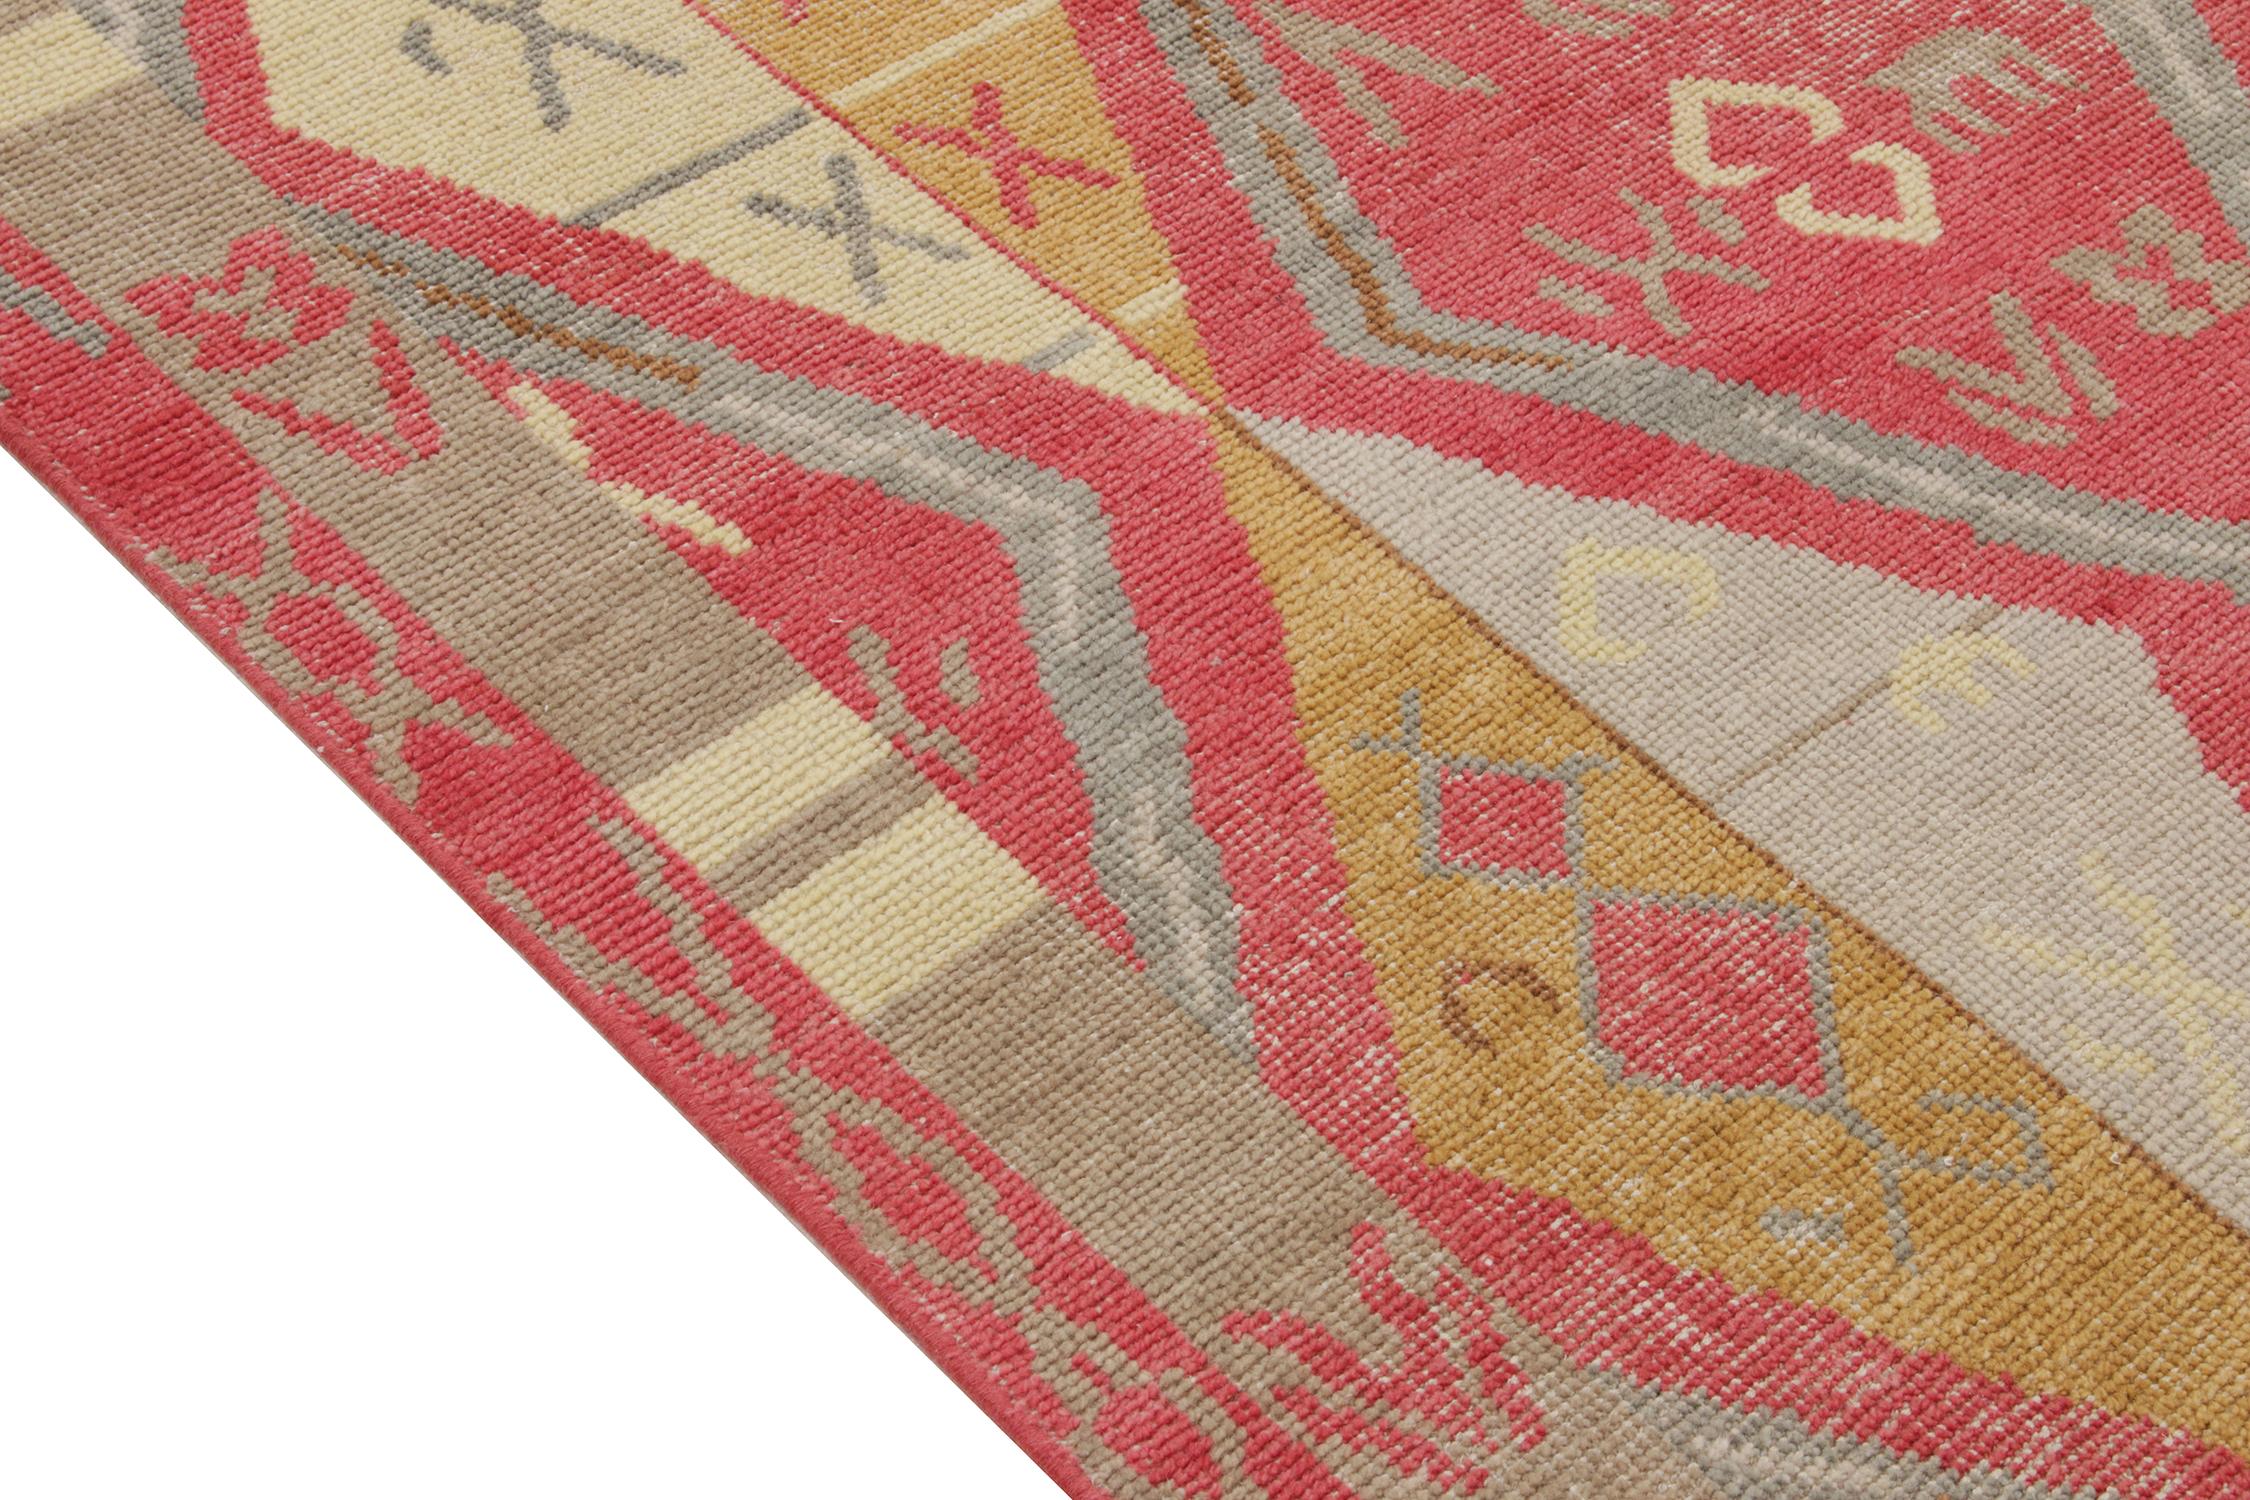 Hand-Knotted Rug & Kilim's Distressed Yuruk Style Rug in Red, Gray, Gold Diamond Pattern For Sale